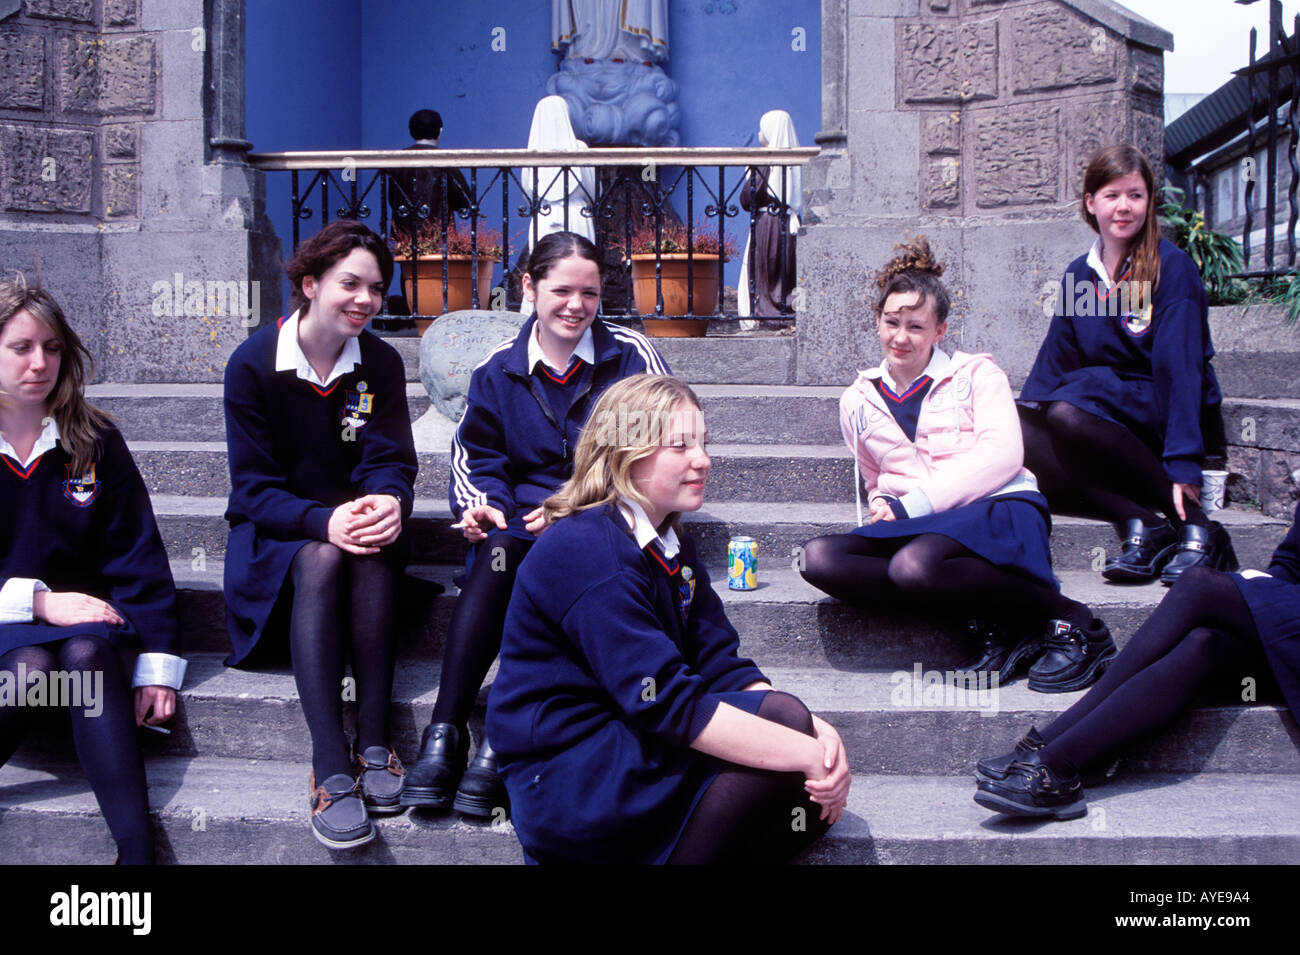 A group of Catholic School girls lounging during recess Dingle Ireland Stock Photo